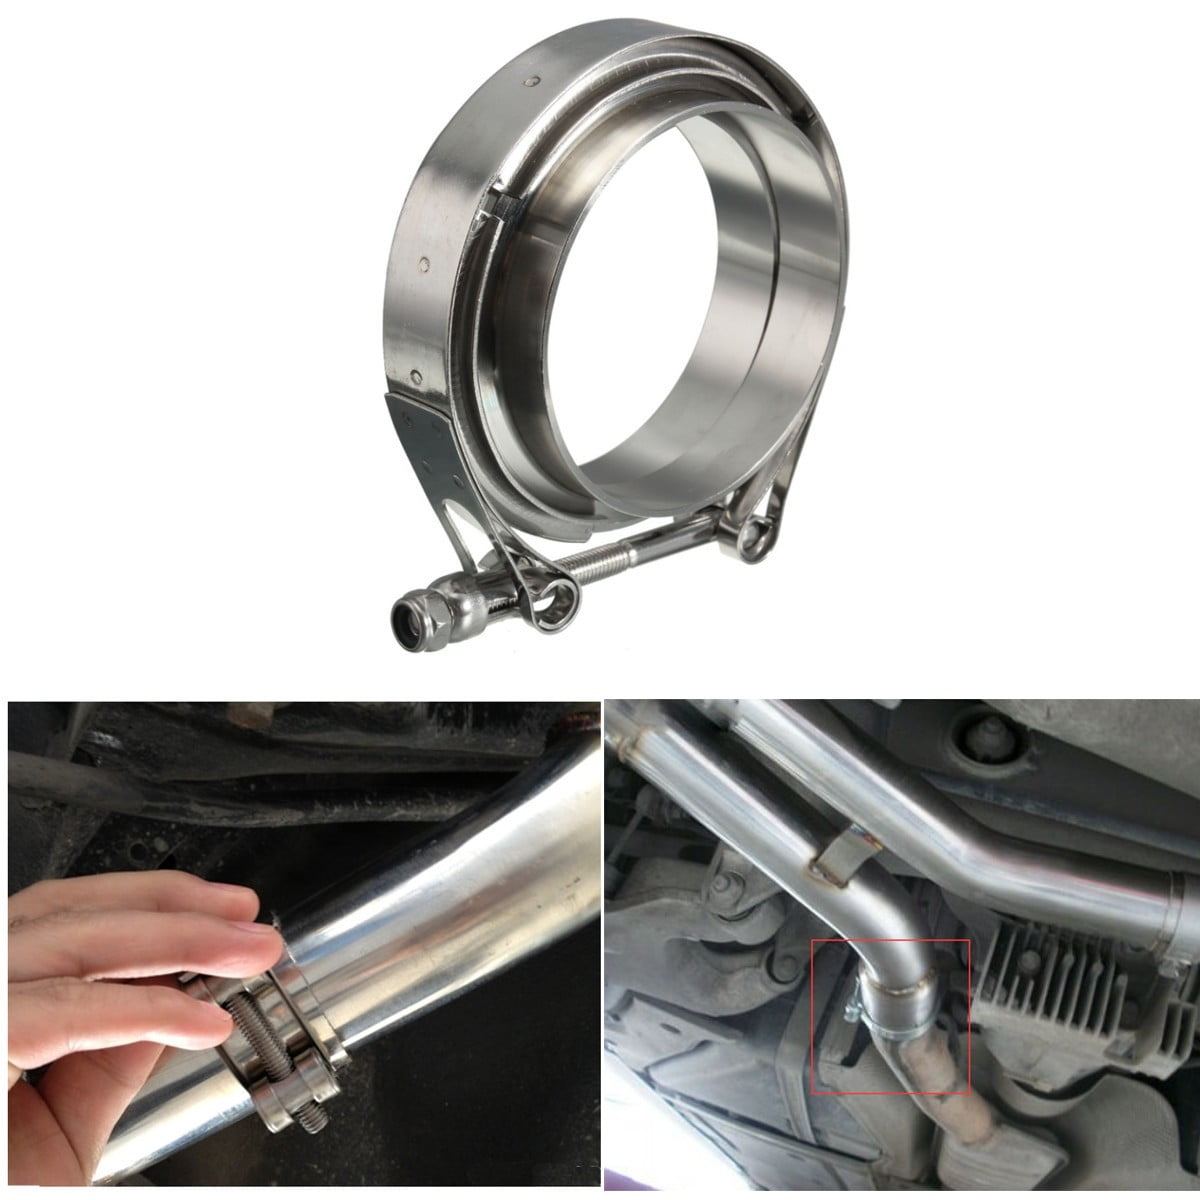 3 inch 76mm Stainless Steel Dump Pipe Turbo Exhaust V-Band Clamp Kit 304 stainless steel male And Female Flange 304 Stainless Steel Clamp-For Performance Exhaust Pipes 3.0 Downpipe,Turbo